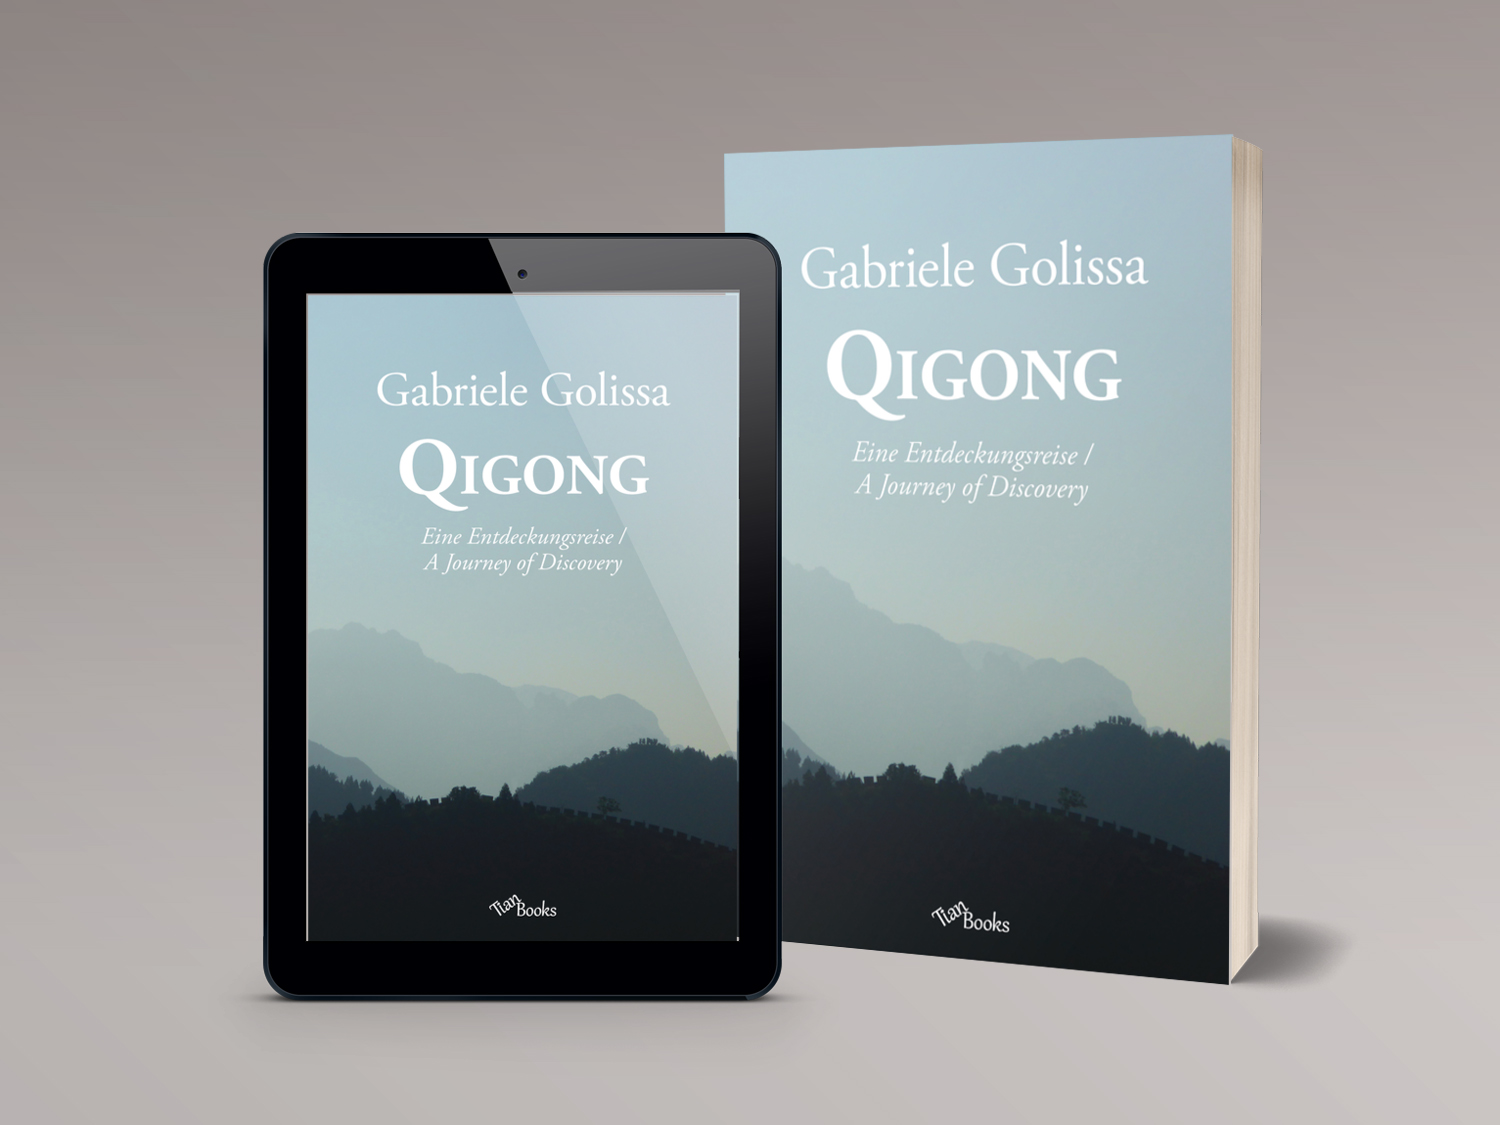 "Qigong - A Journey of Discovery" as paperback and eBook.